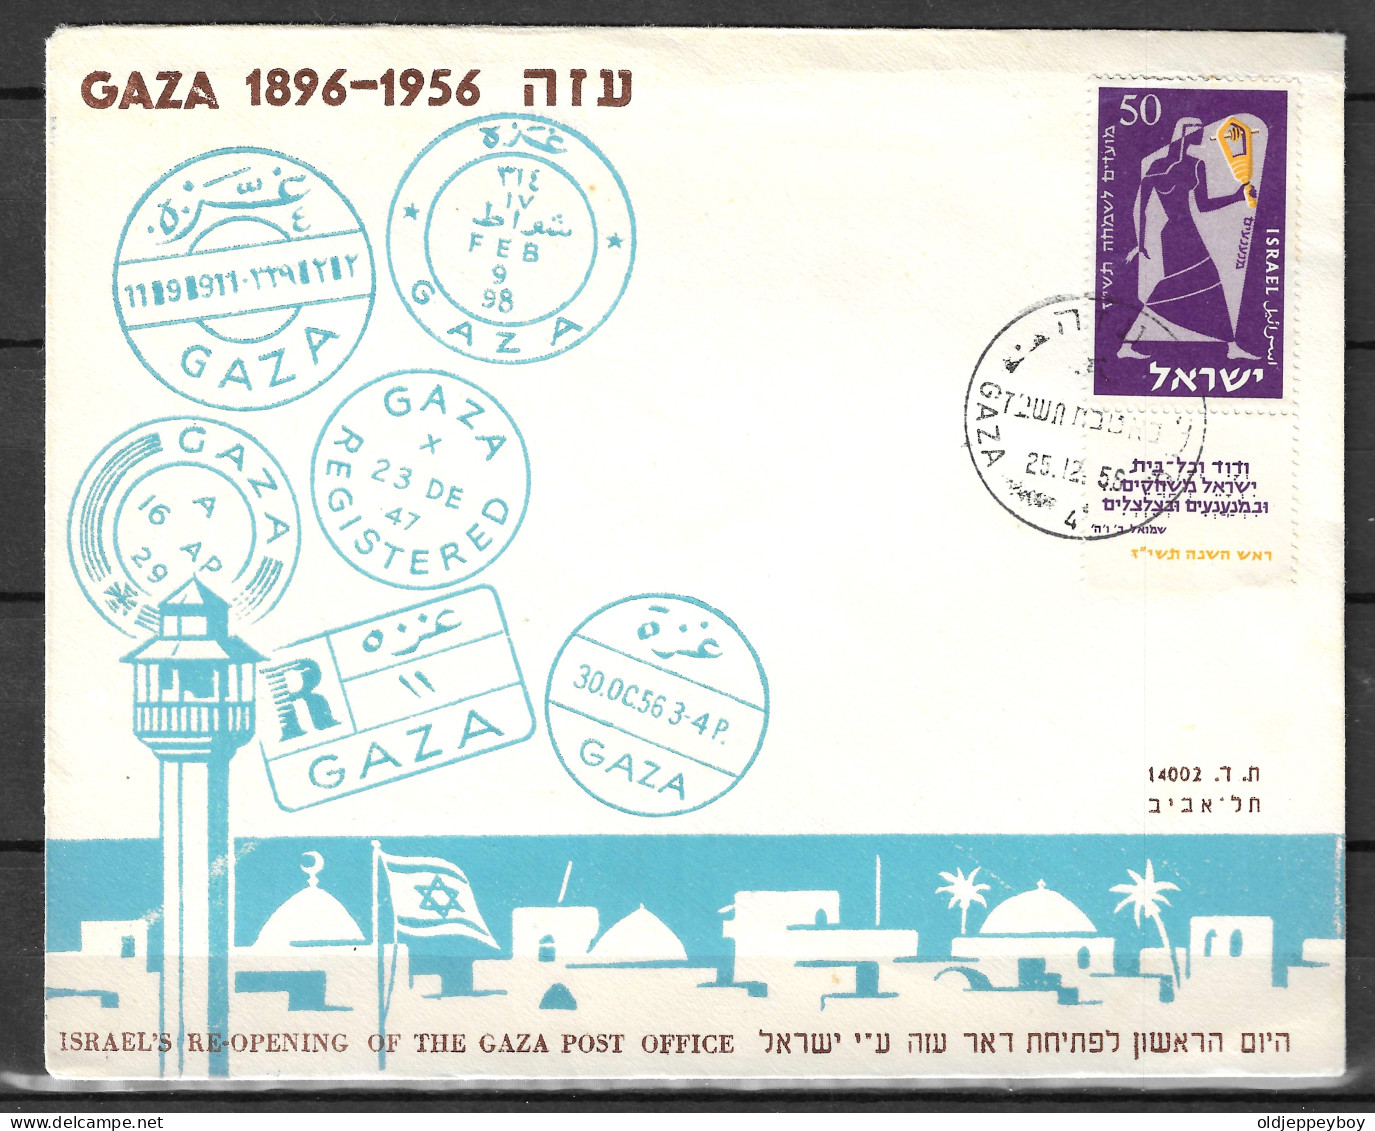 1956 POO FIRST DAY POST OFFICE OPENING PALESTINE GAZA STRIP MAIL STAMP ENVELOPE ISRAEL JUDAICA CACHET COVER - Lettres & Documents